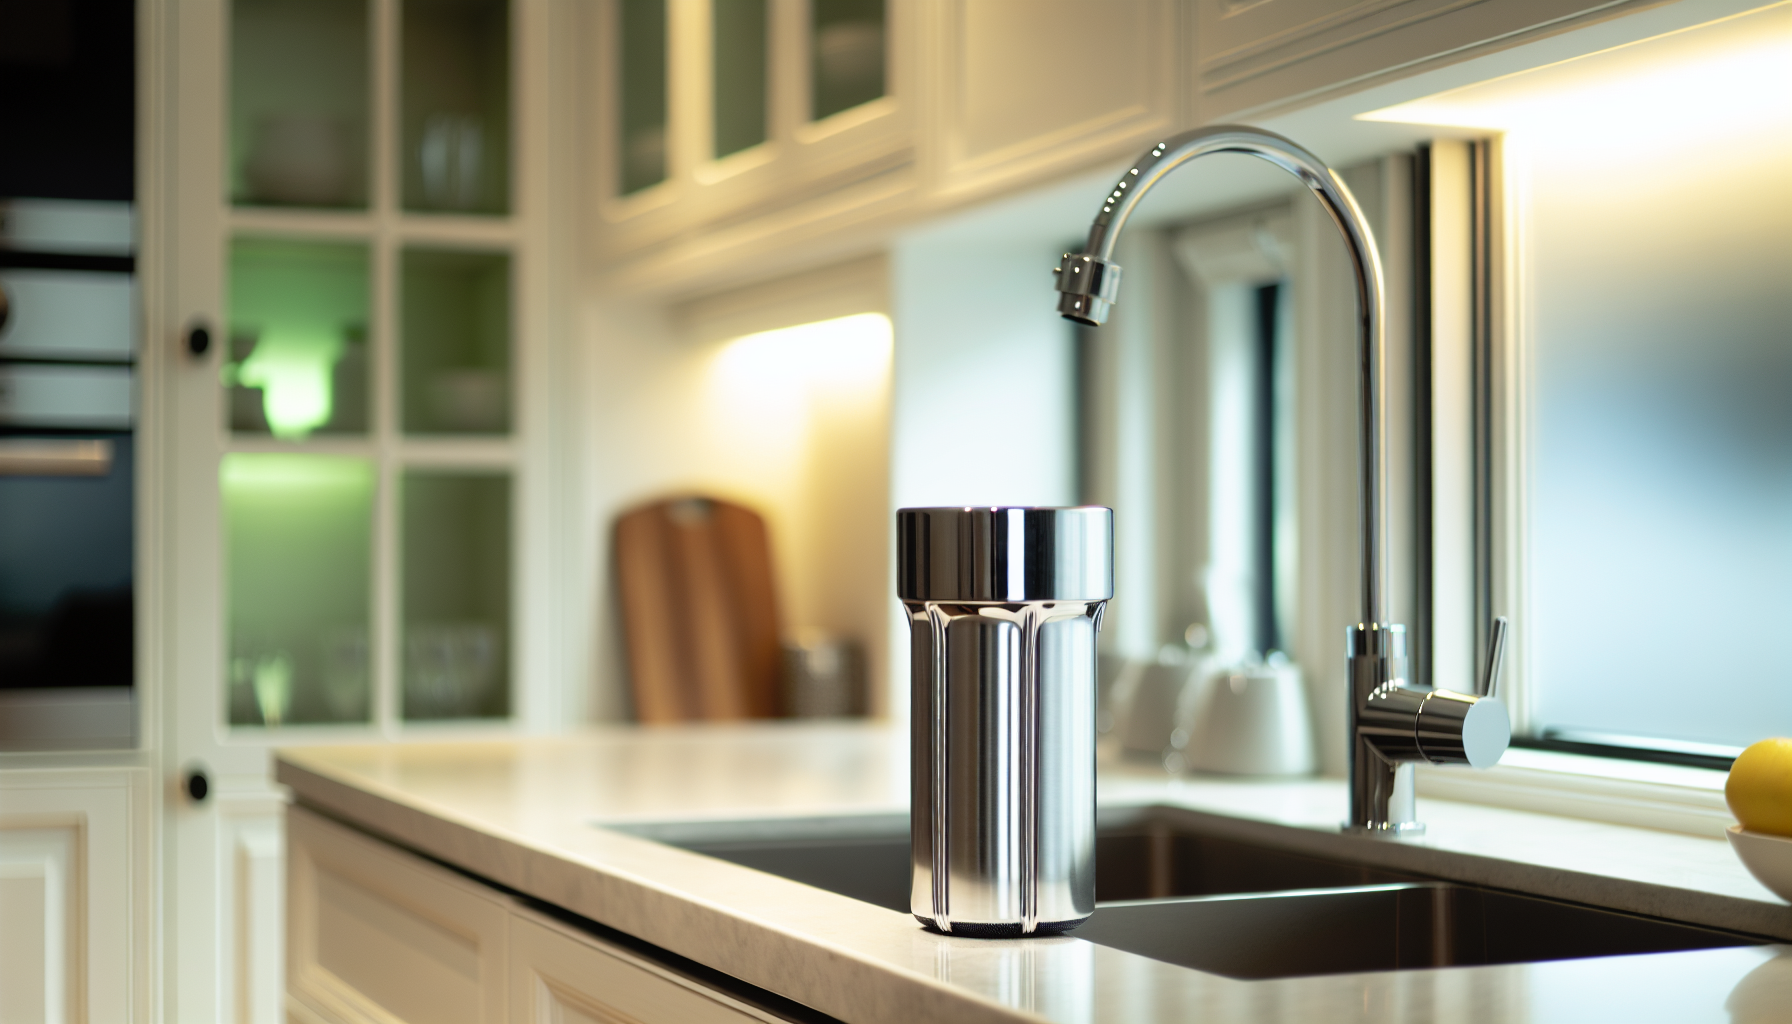 On tap water filter installed in a modern kitchen